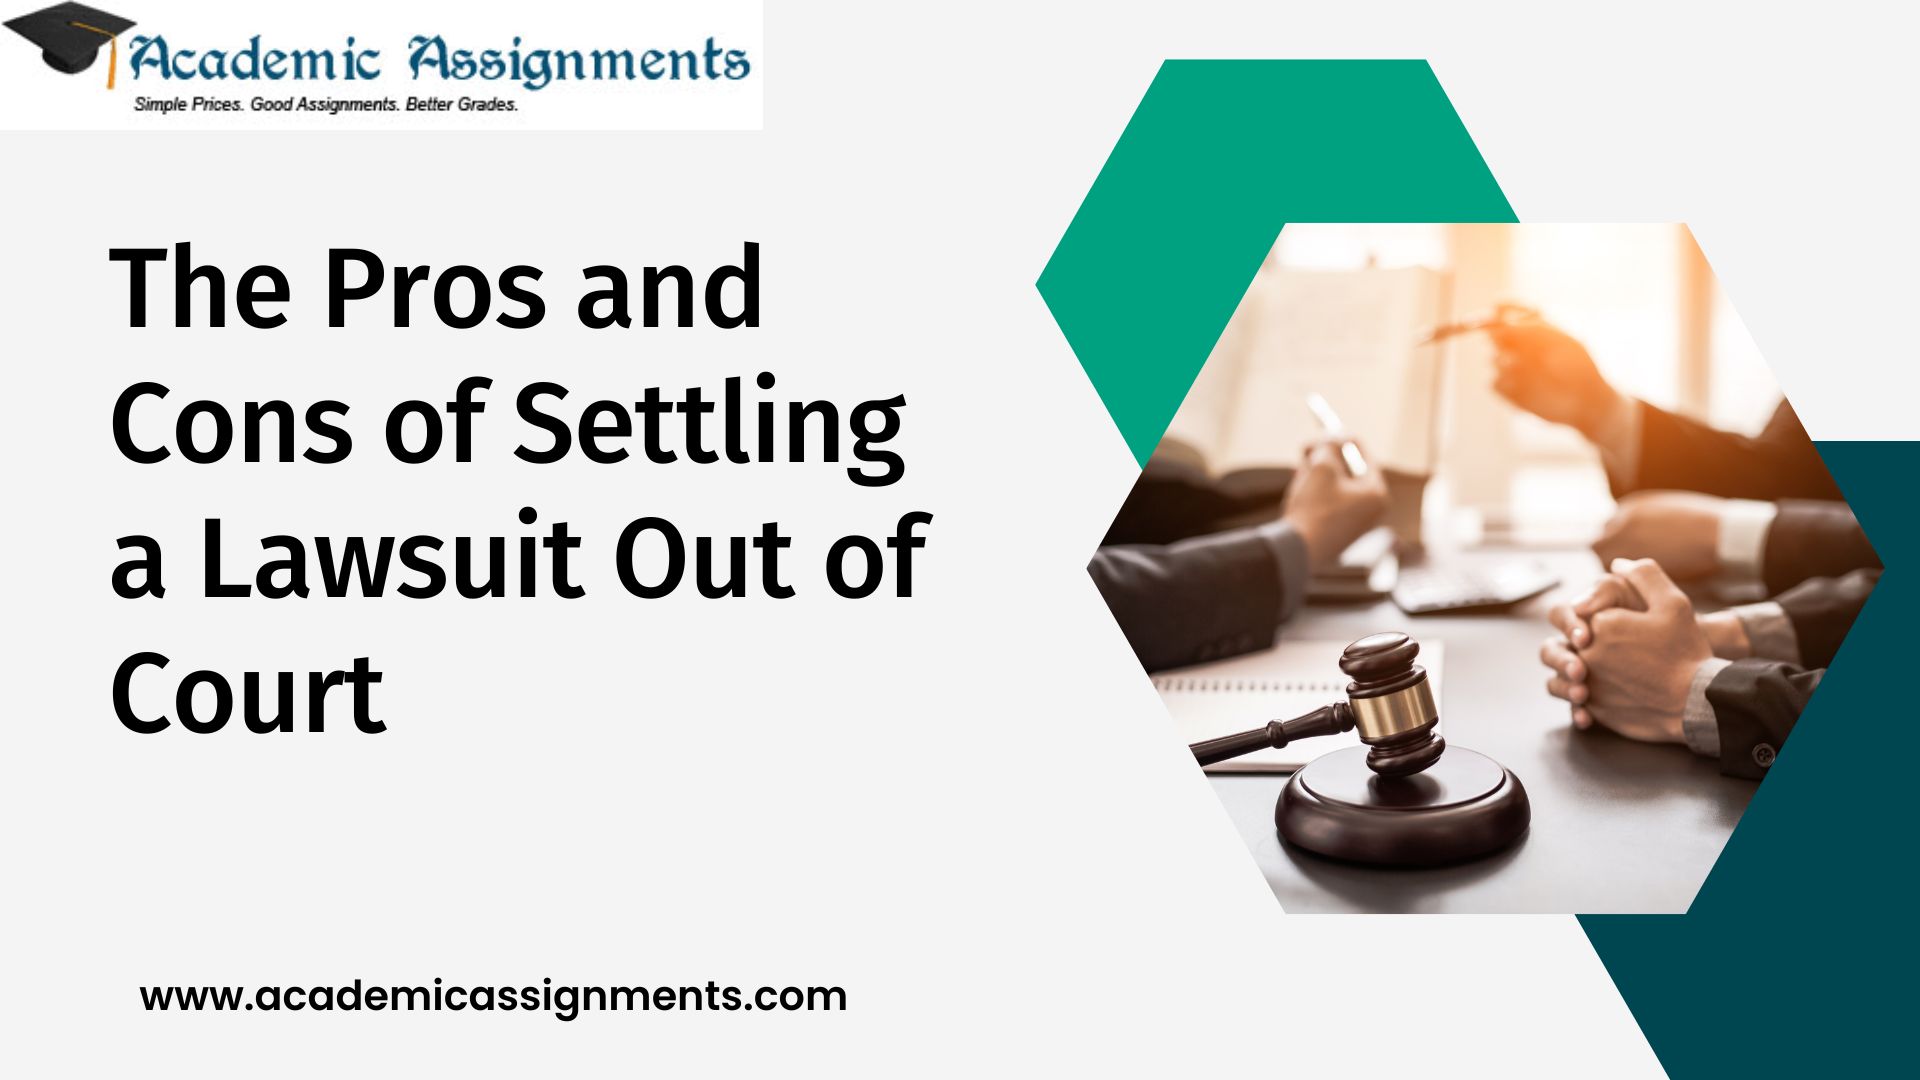 The Pros and Cons of Settling a Lawsuit Out of Court